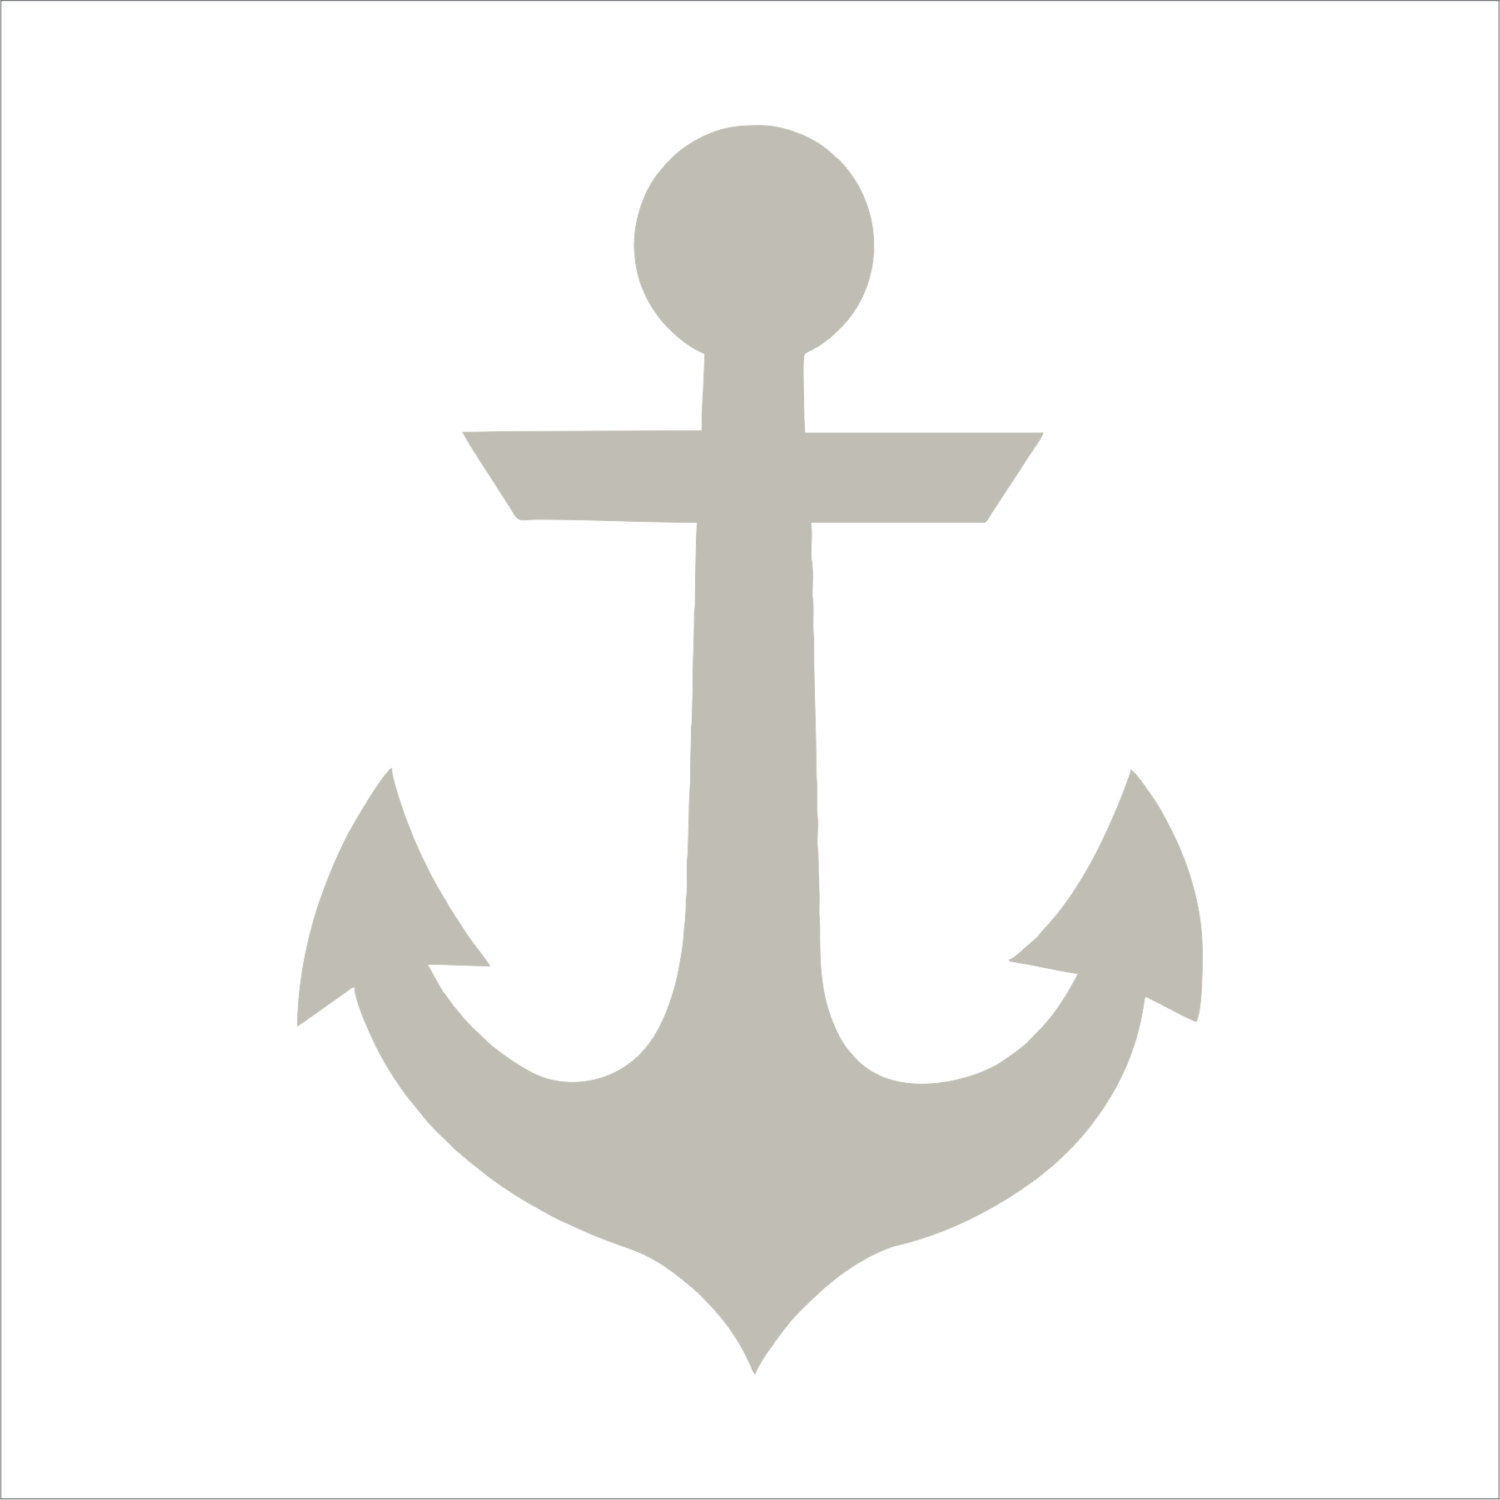 7 Best Images of Anchor Cut Out Template Printable - Anchor ...